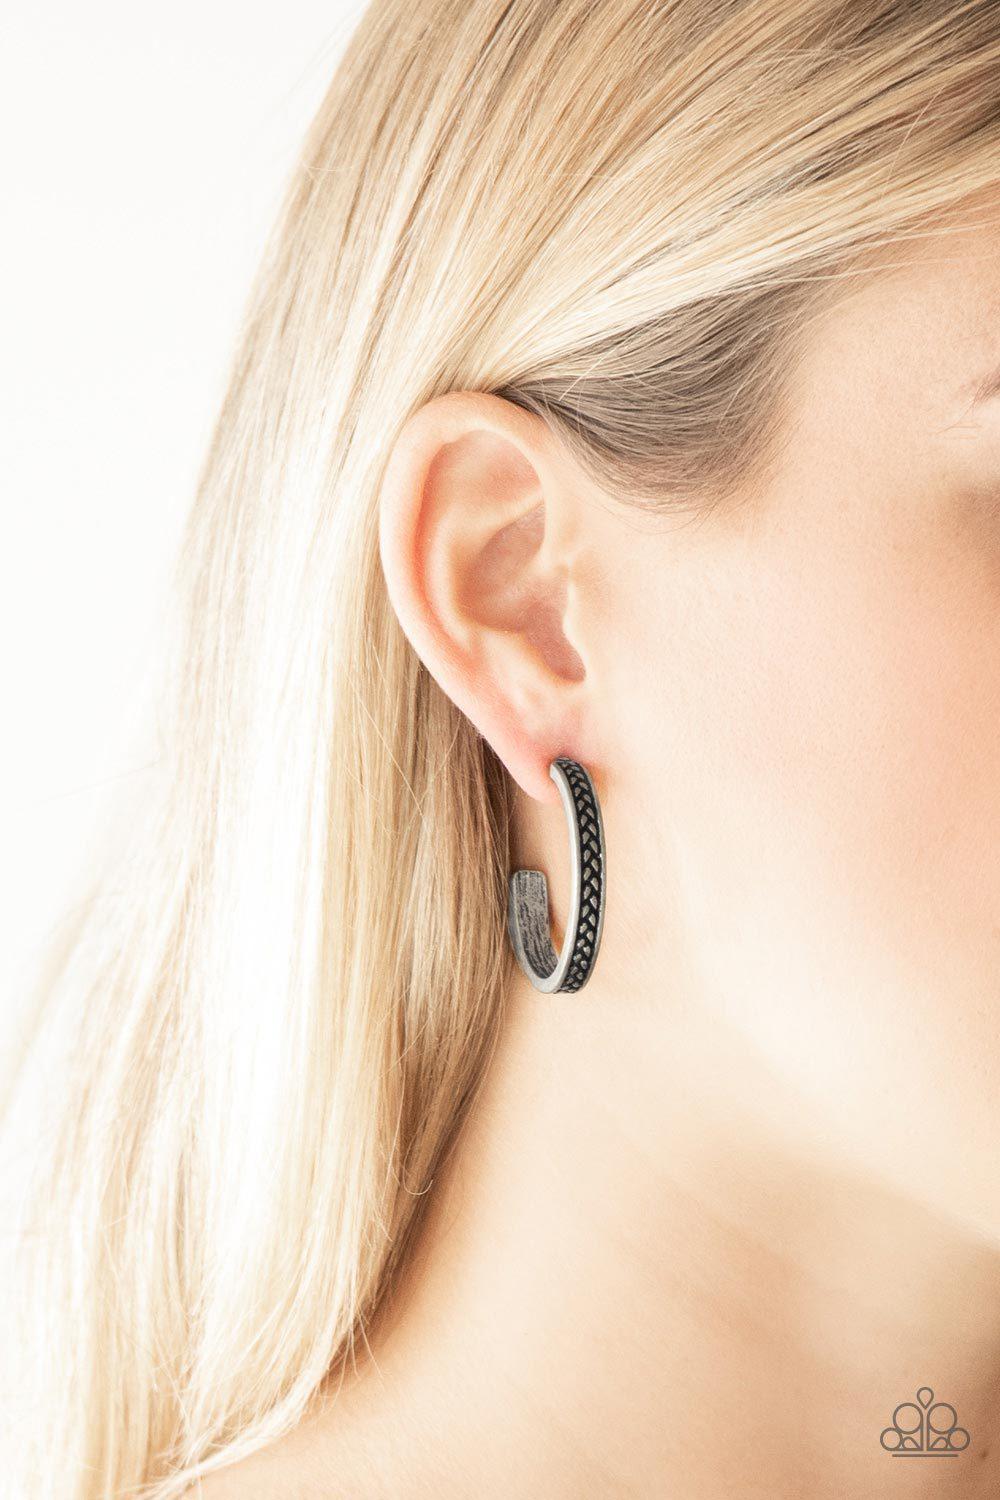 Rugged Retro Silver Hoop Earrings - Paparazzi Accessories-CarasShop.com - $5 Jewelry by Cara Jewels